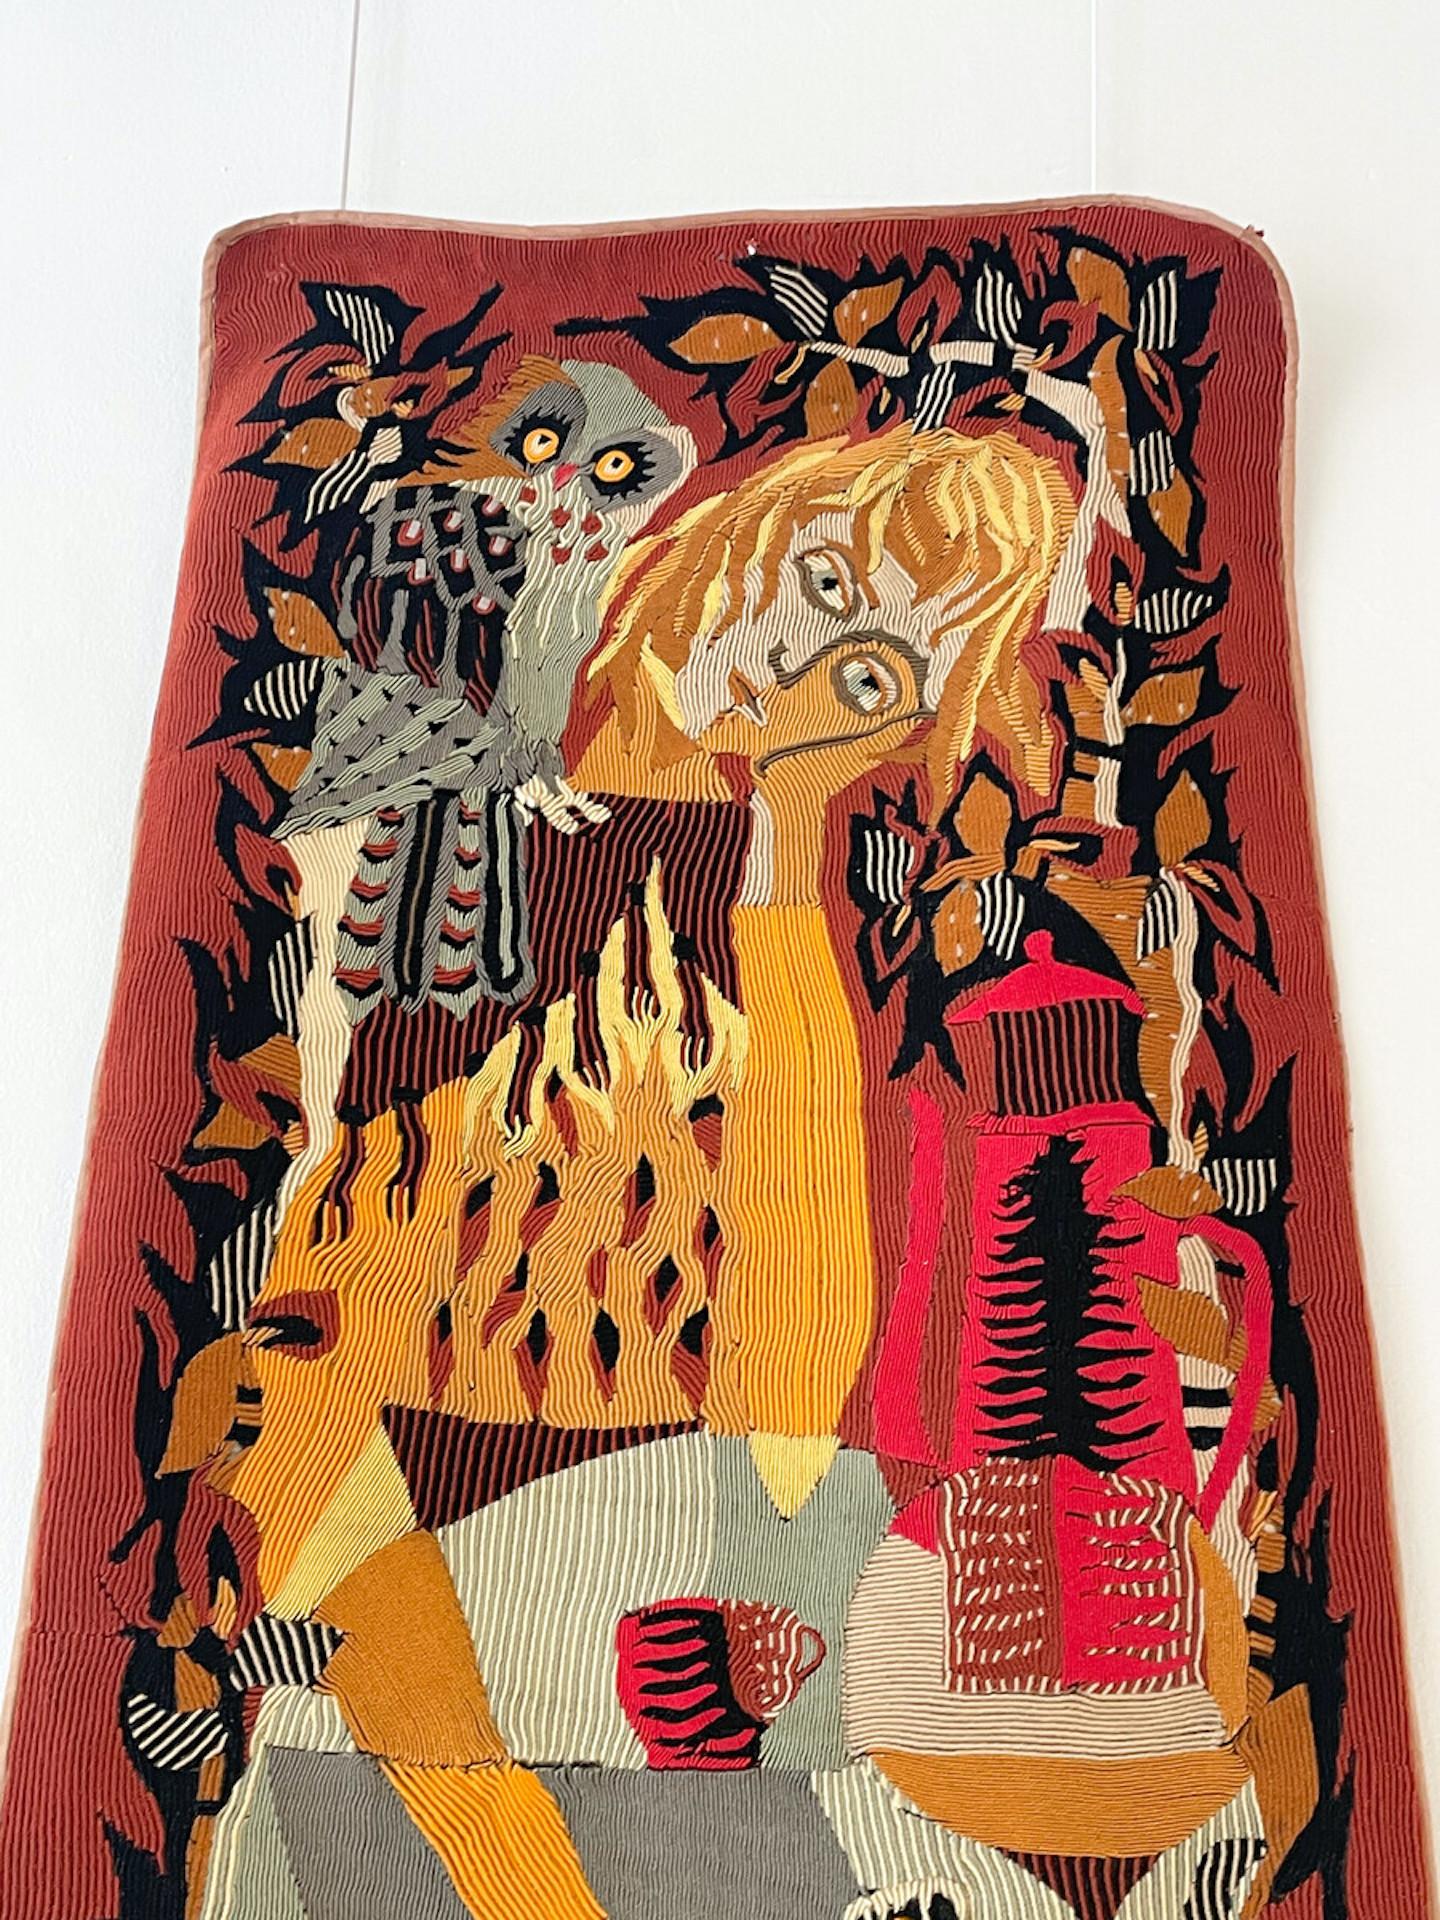 Wool tapestry by Michèle Ray, France, 1960s - signed and numbered.